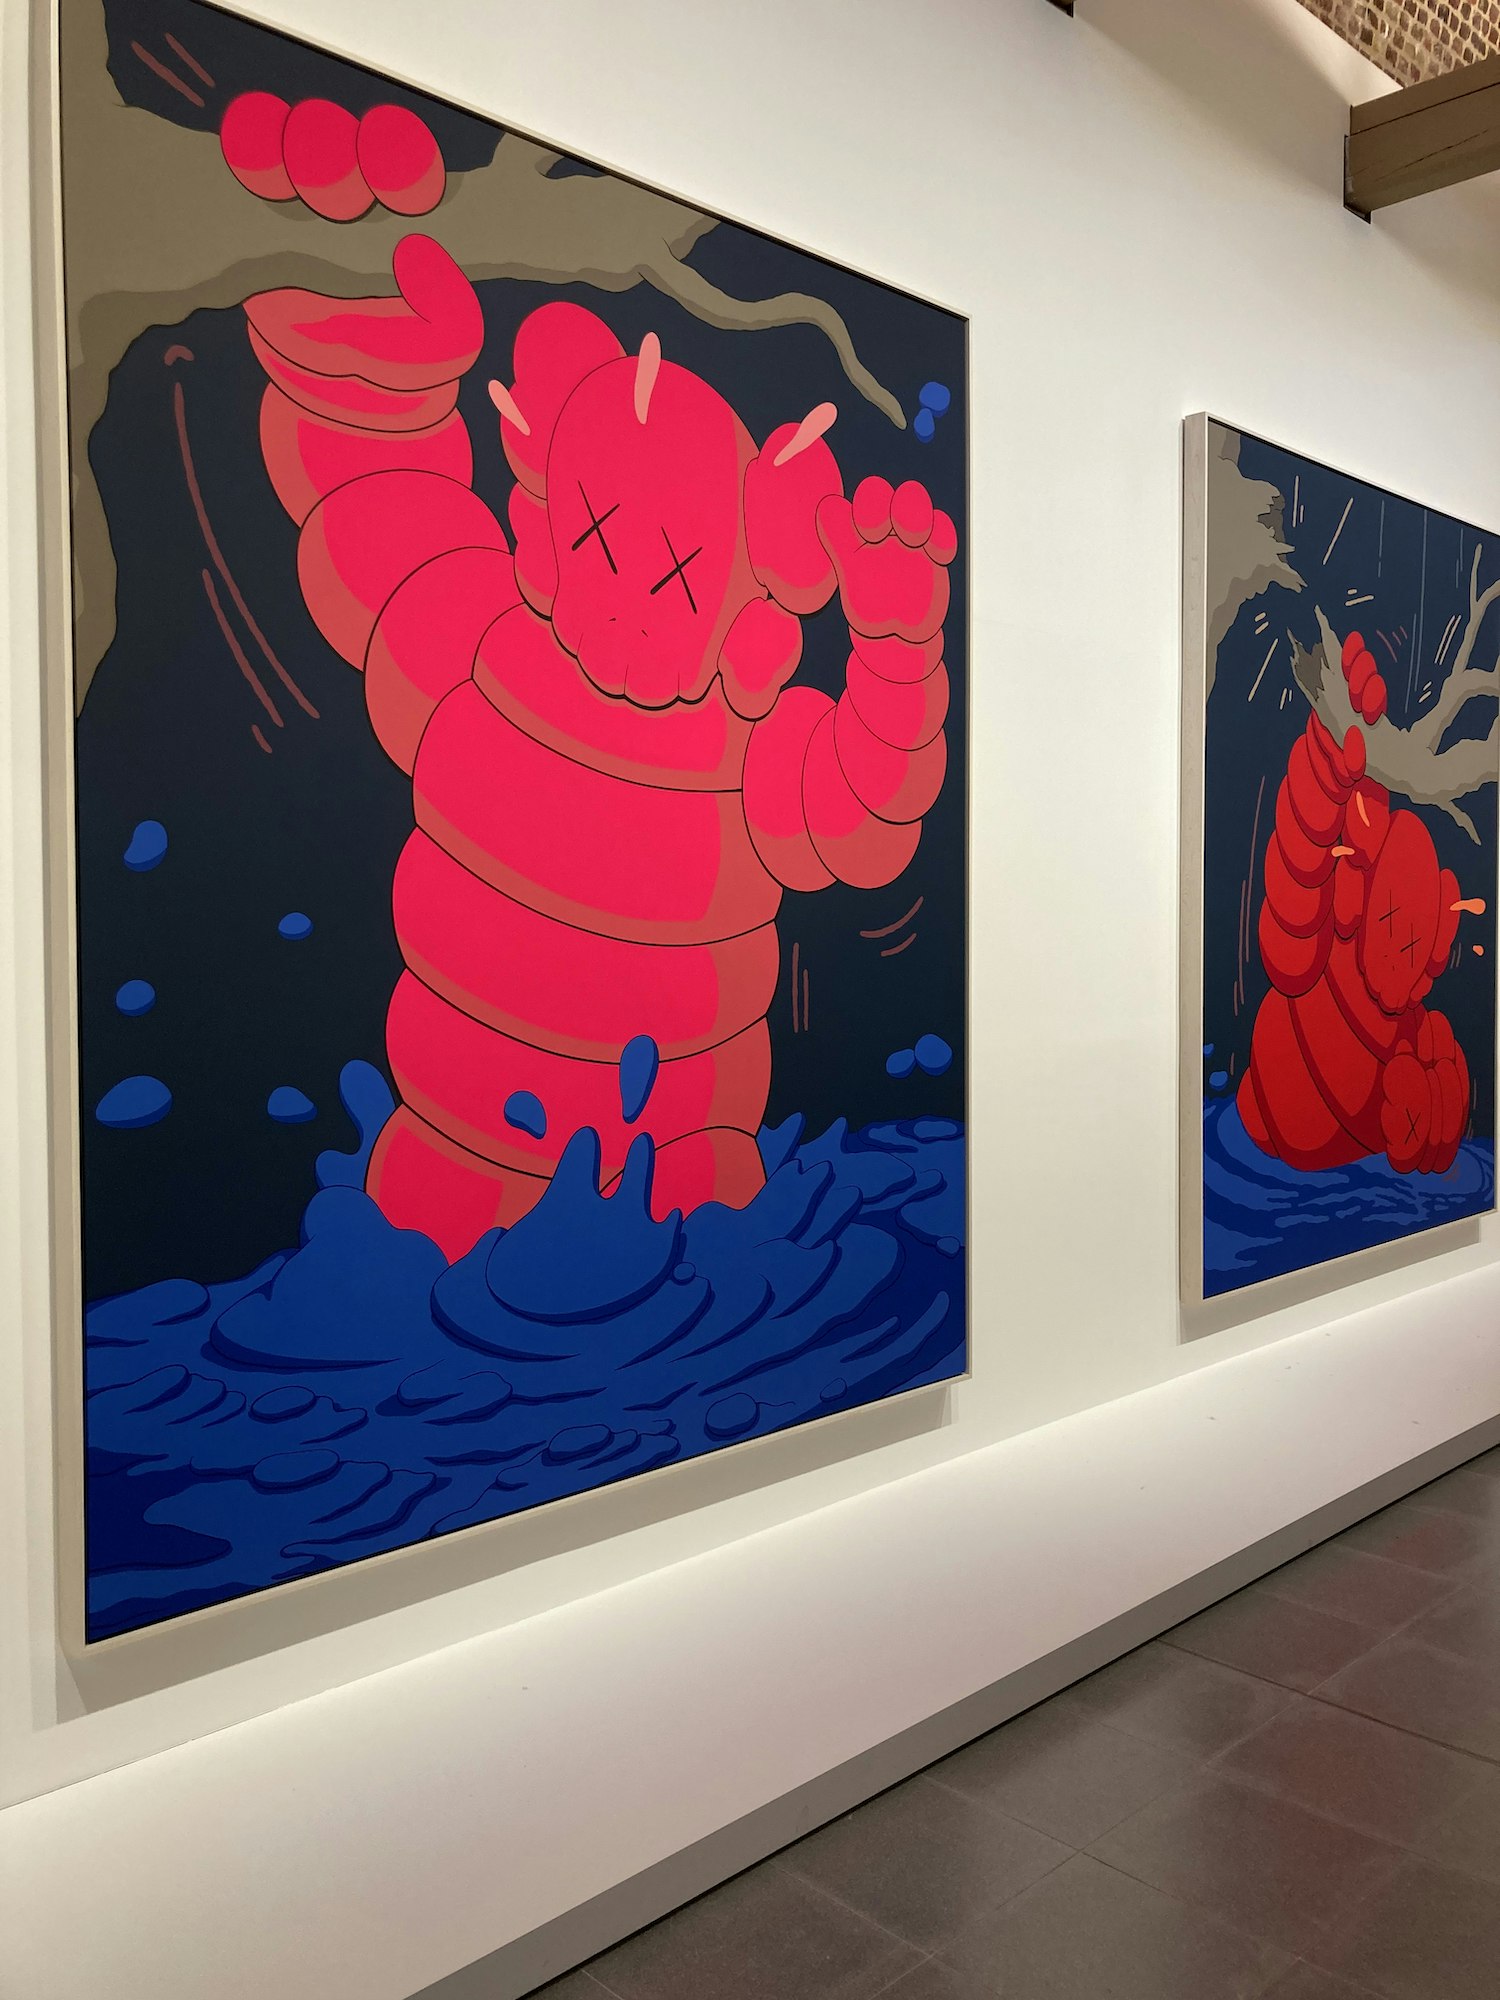 Collective Post - KAWS at Serpentine Gallery 